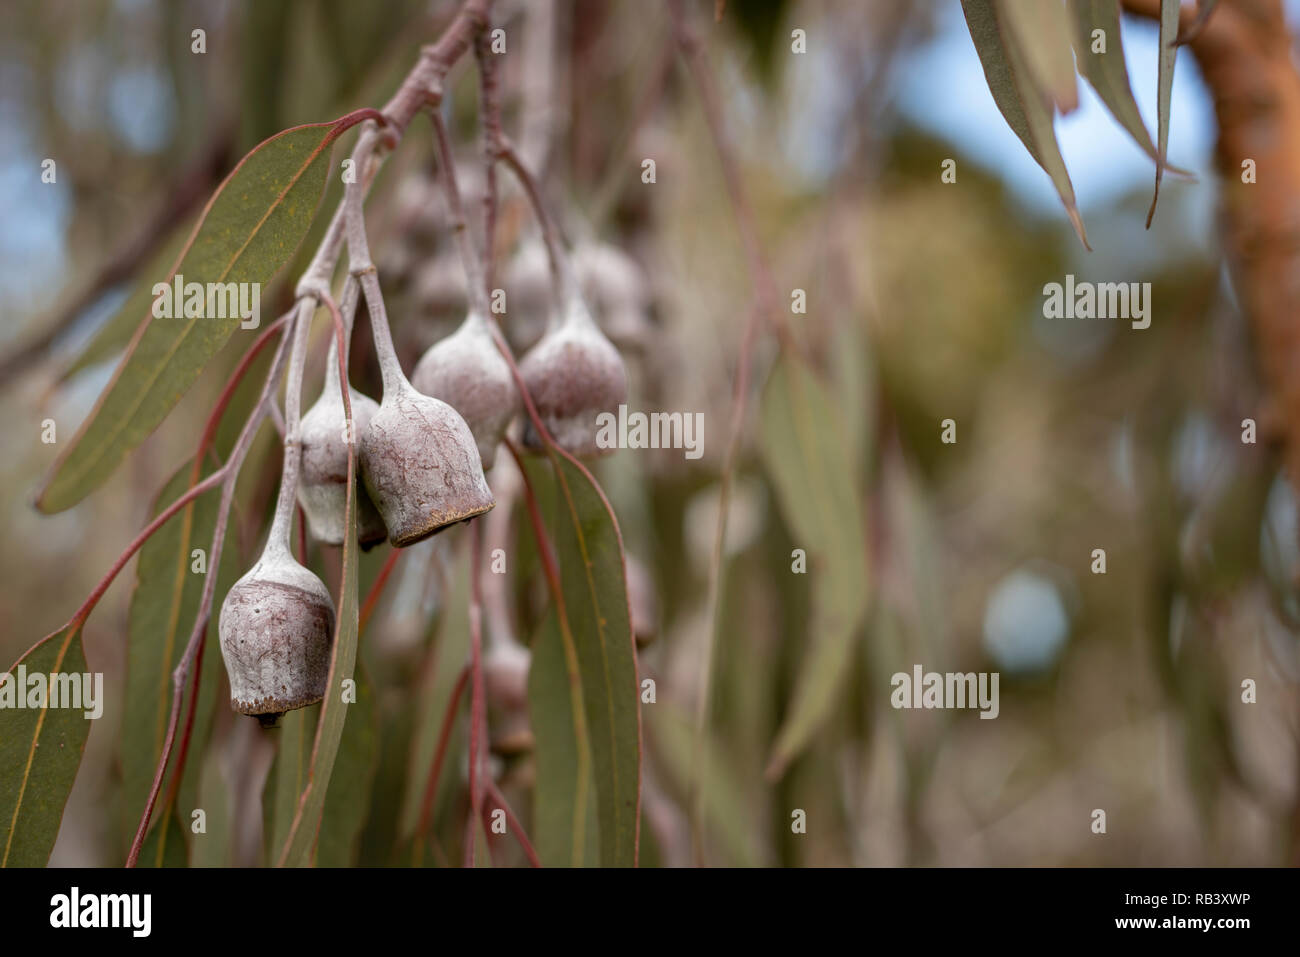 close up of Australian gum nuts from a gum tree, horizontal Stock Photo